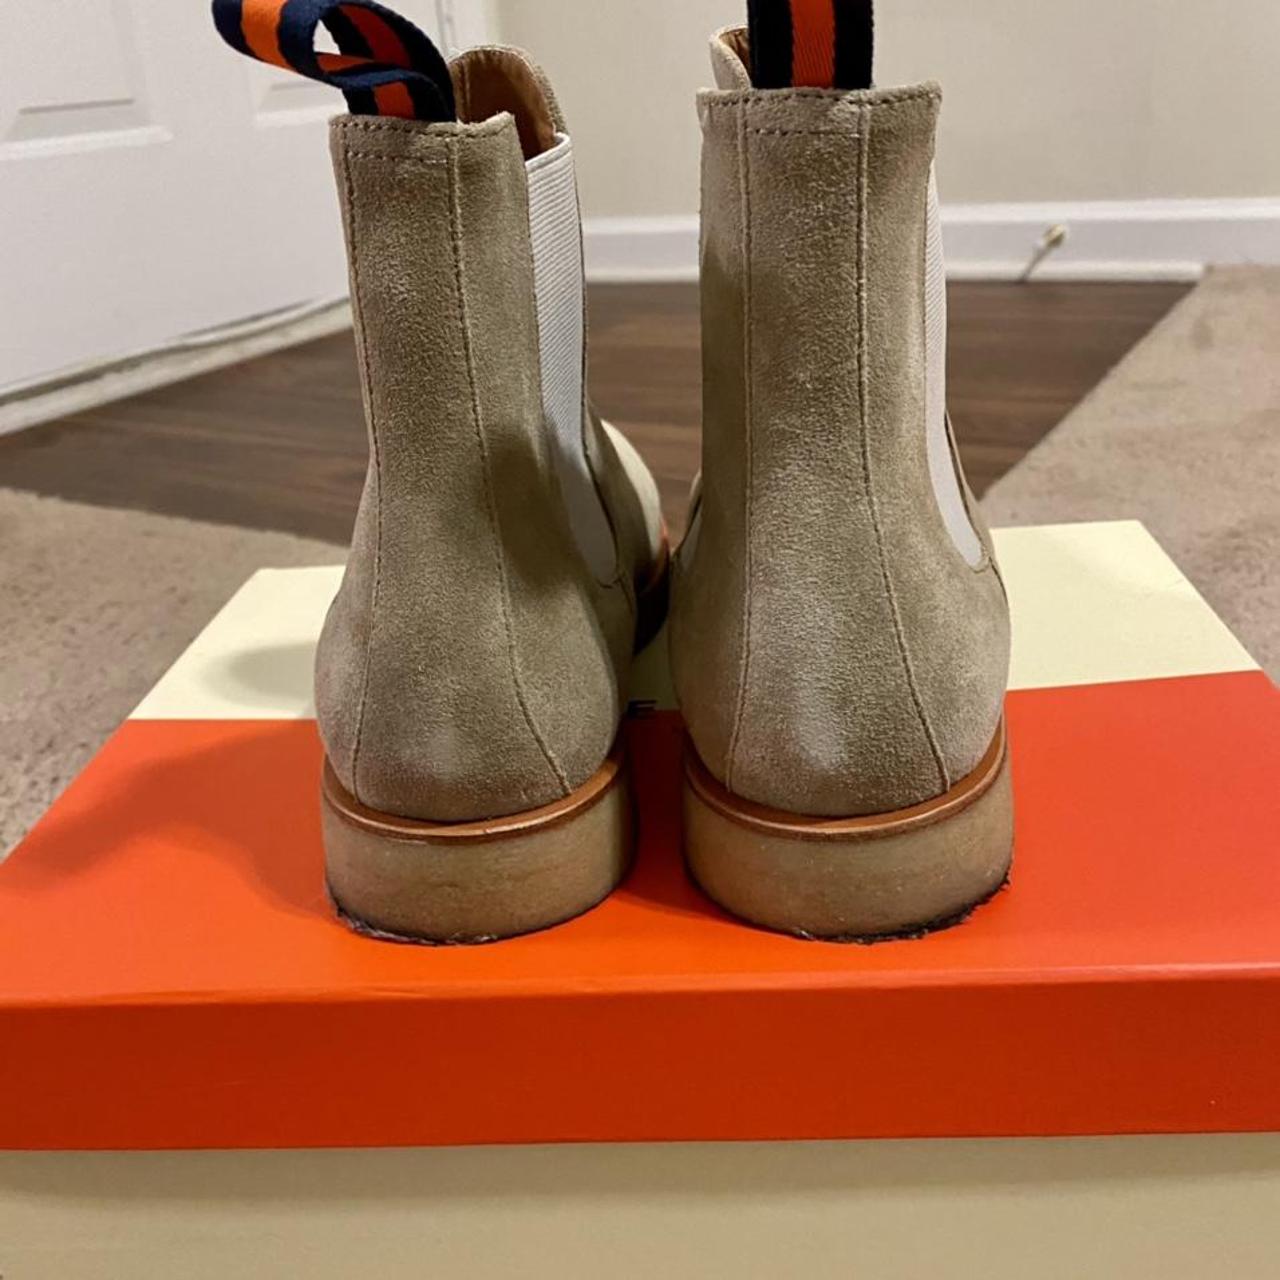 New Republic Chelsea Boots, only worn twice. Comes... - Depop